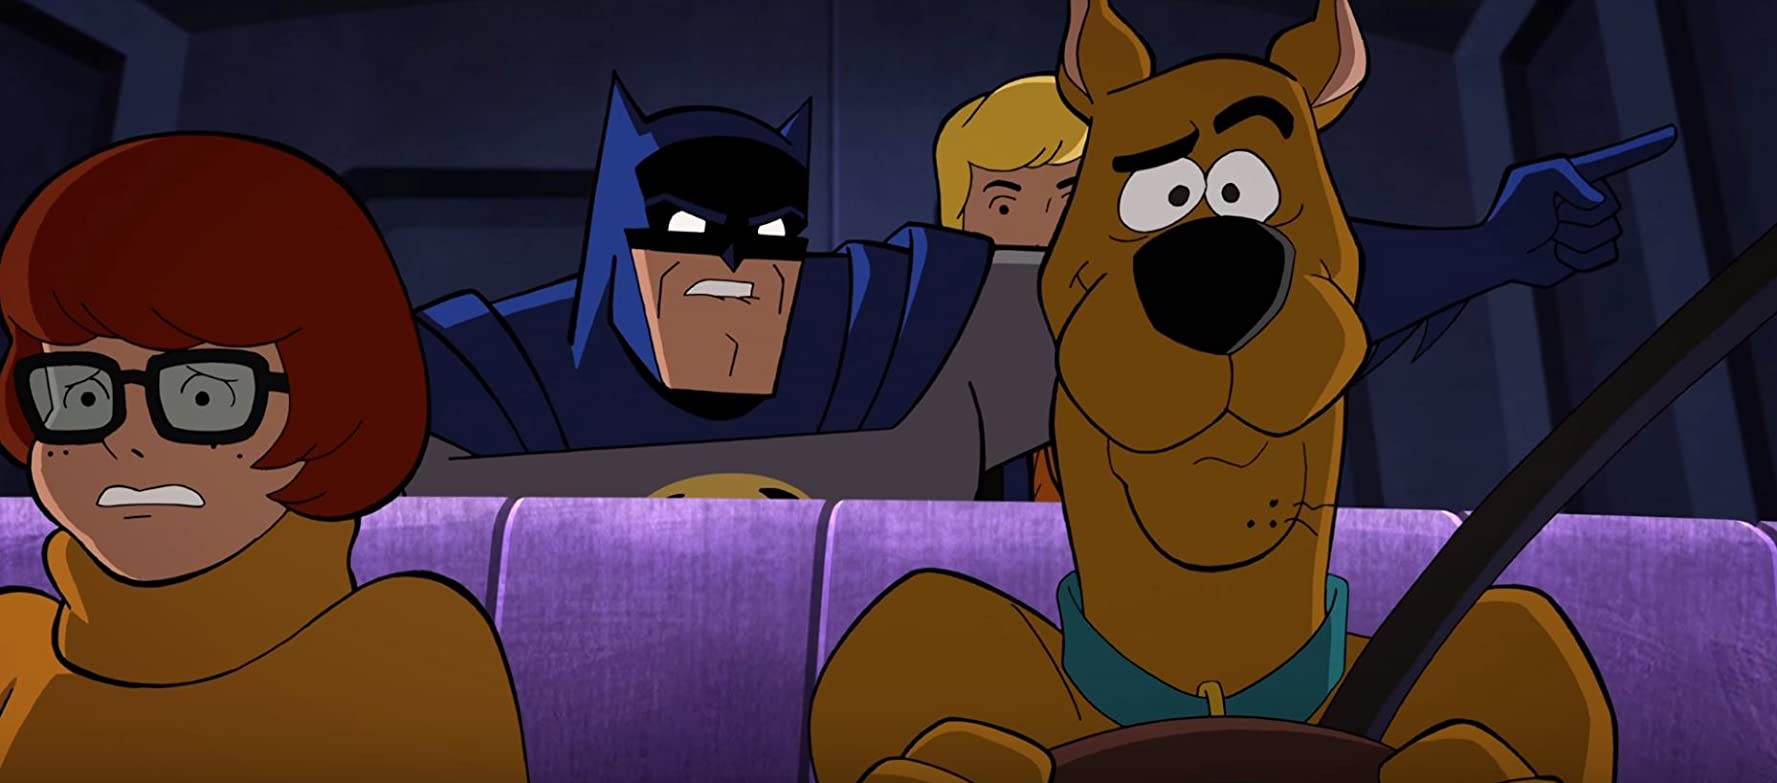 Dentiaguzzi - Scooby-Doo and Batman - The unsolved case